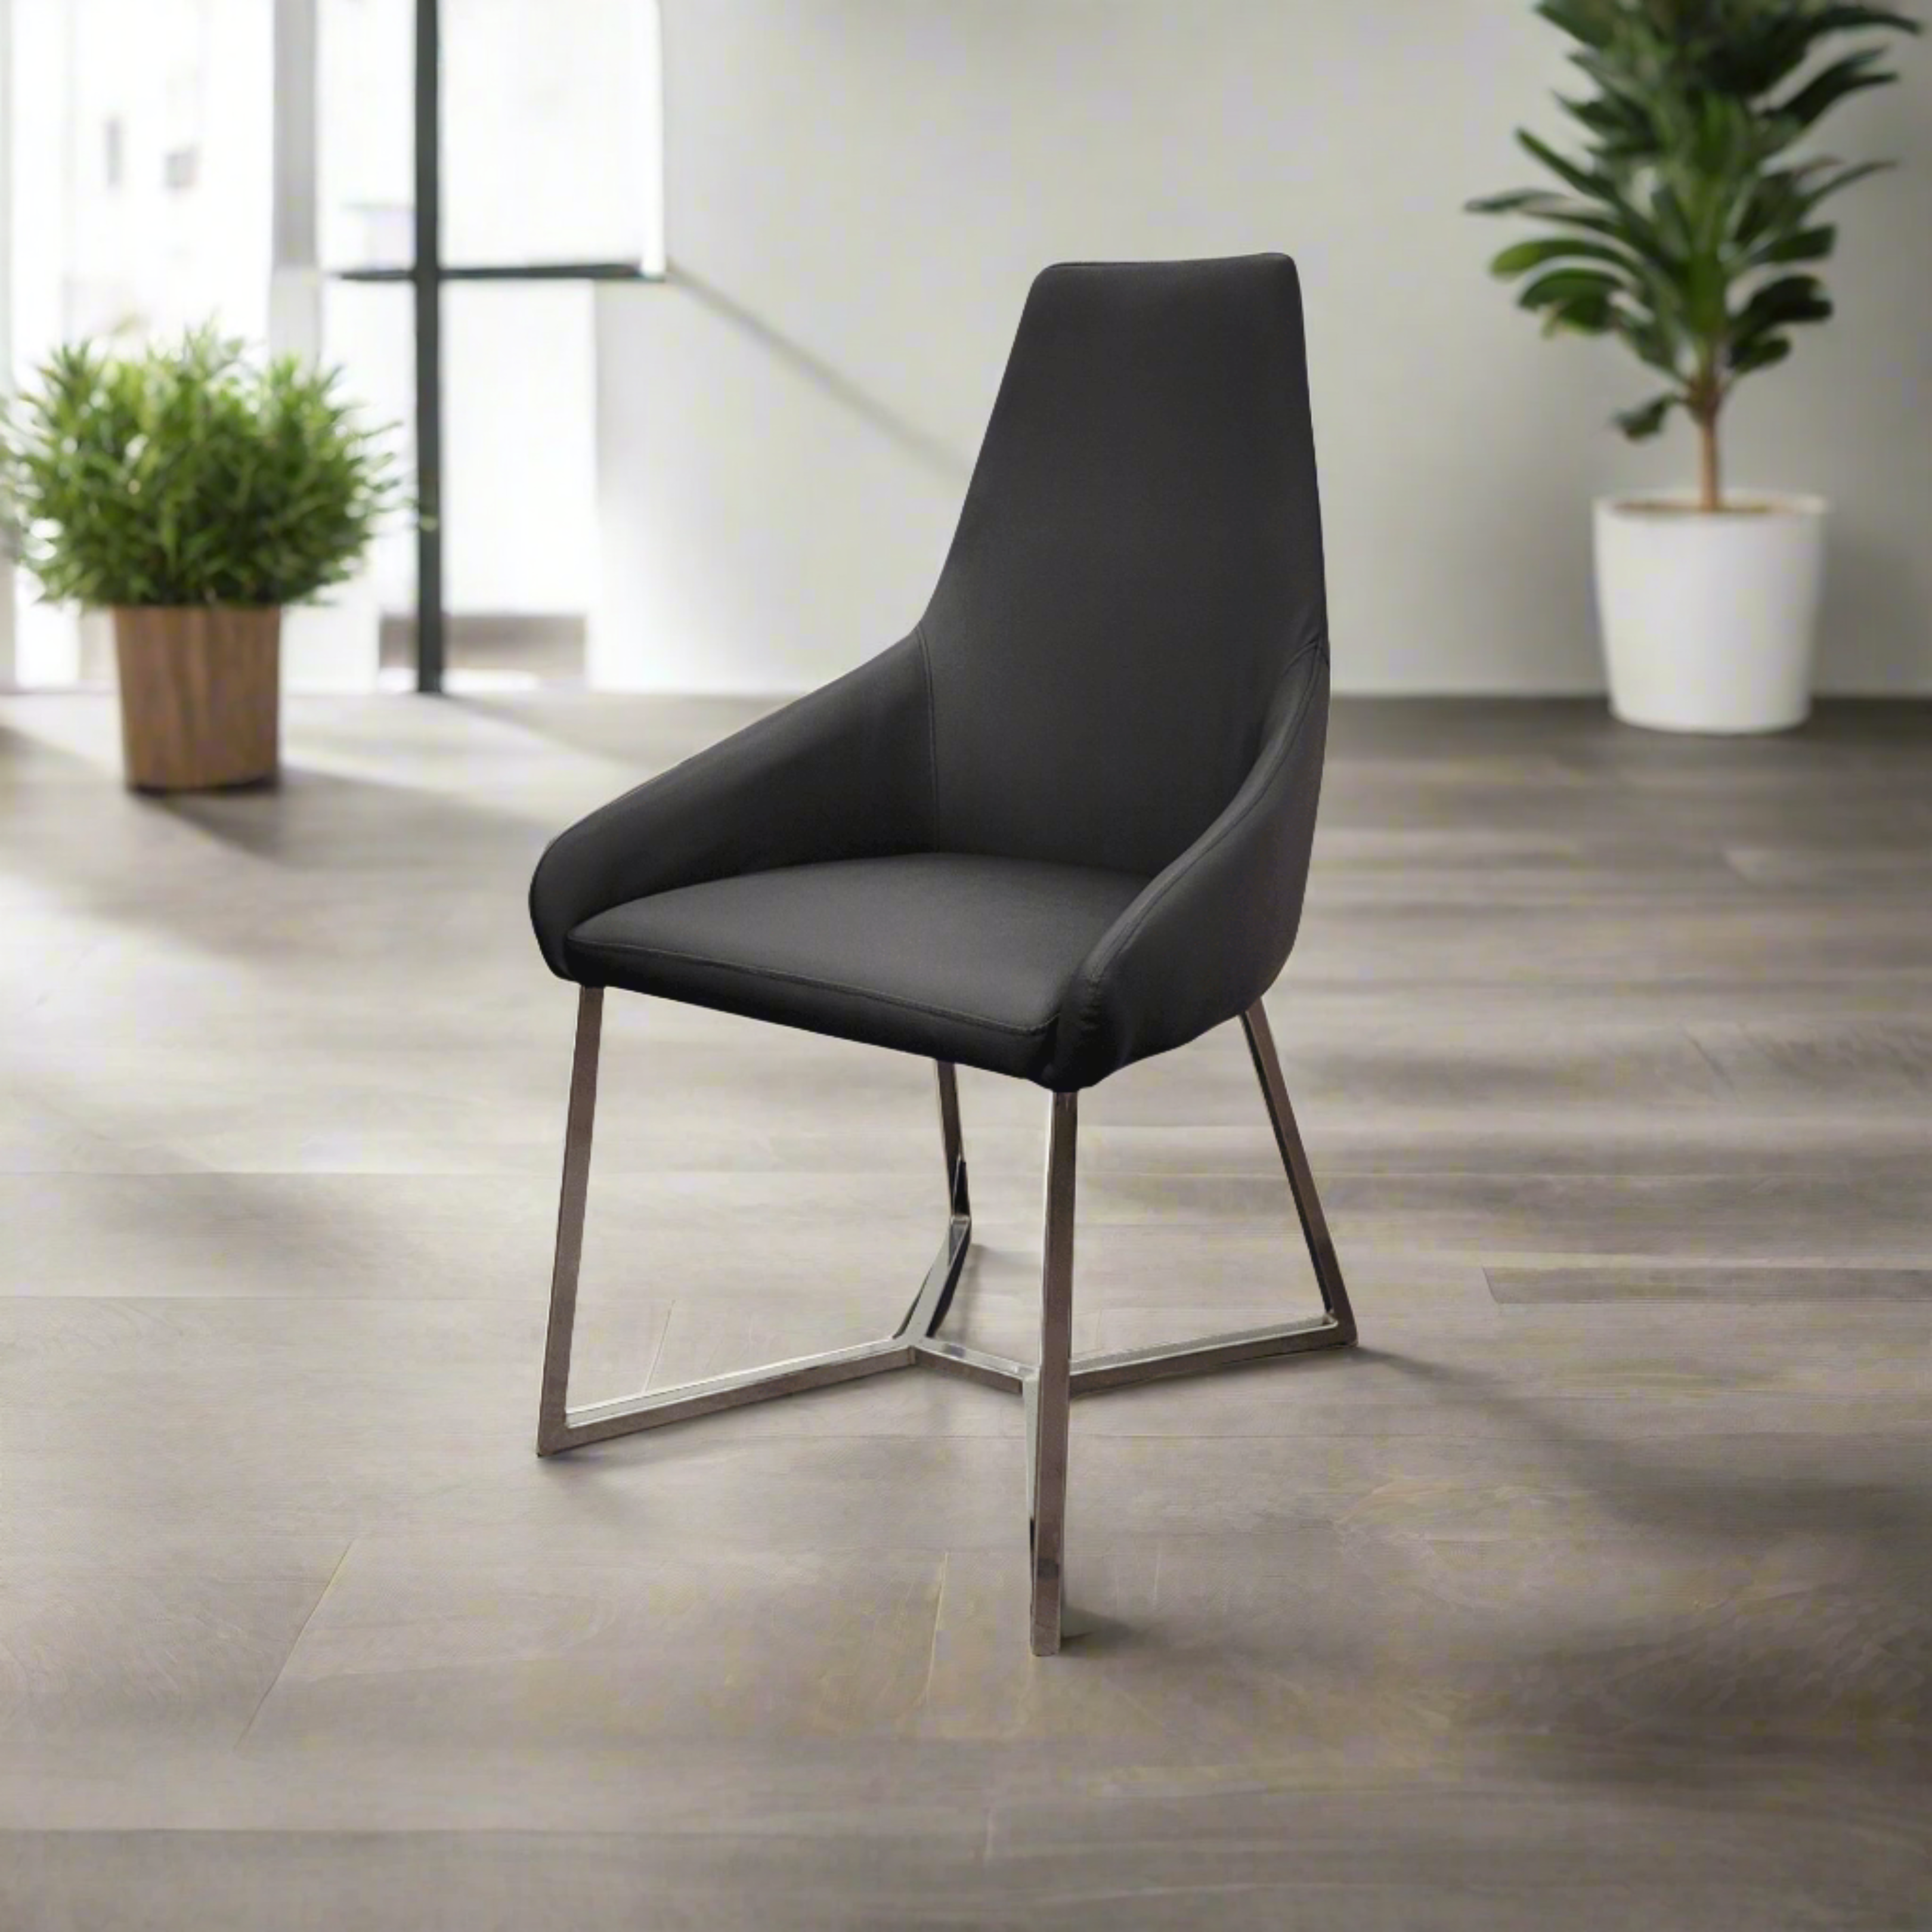 Diamond Dining Chair - Stylish and Comfortable | The A2Z Furniture